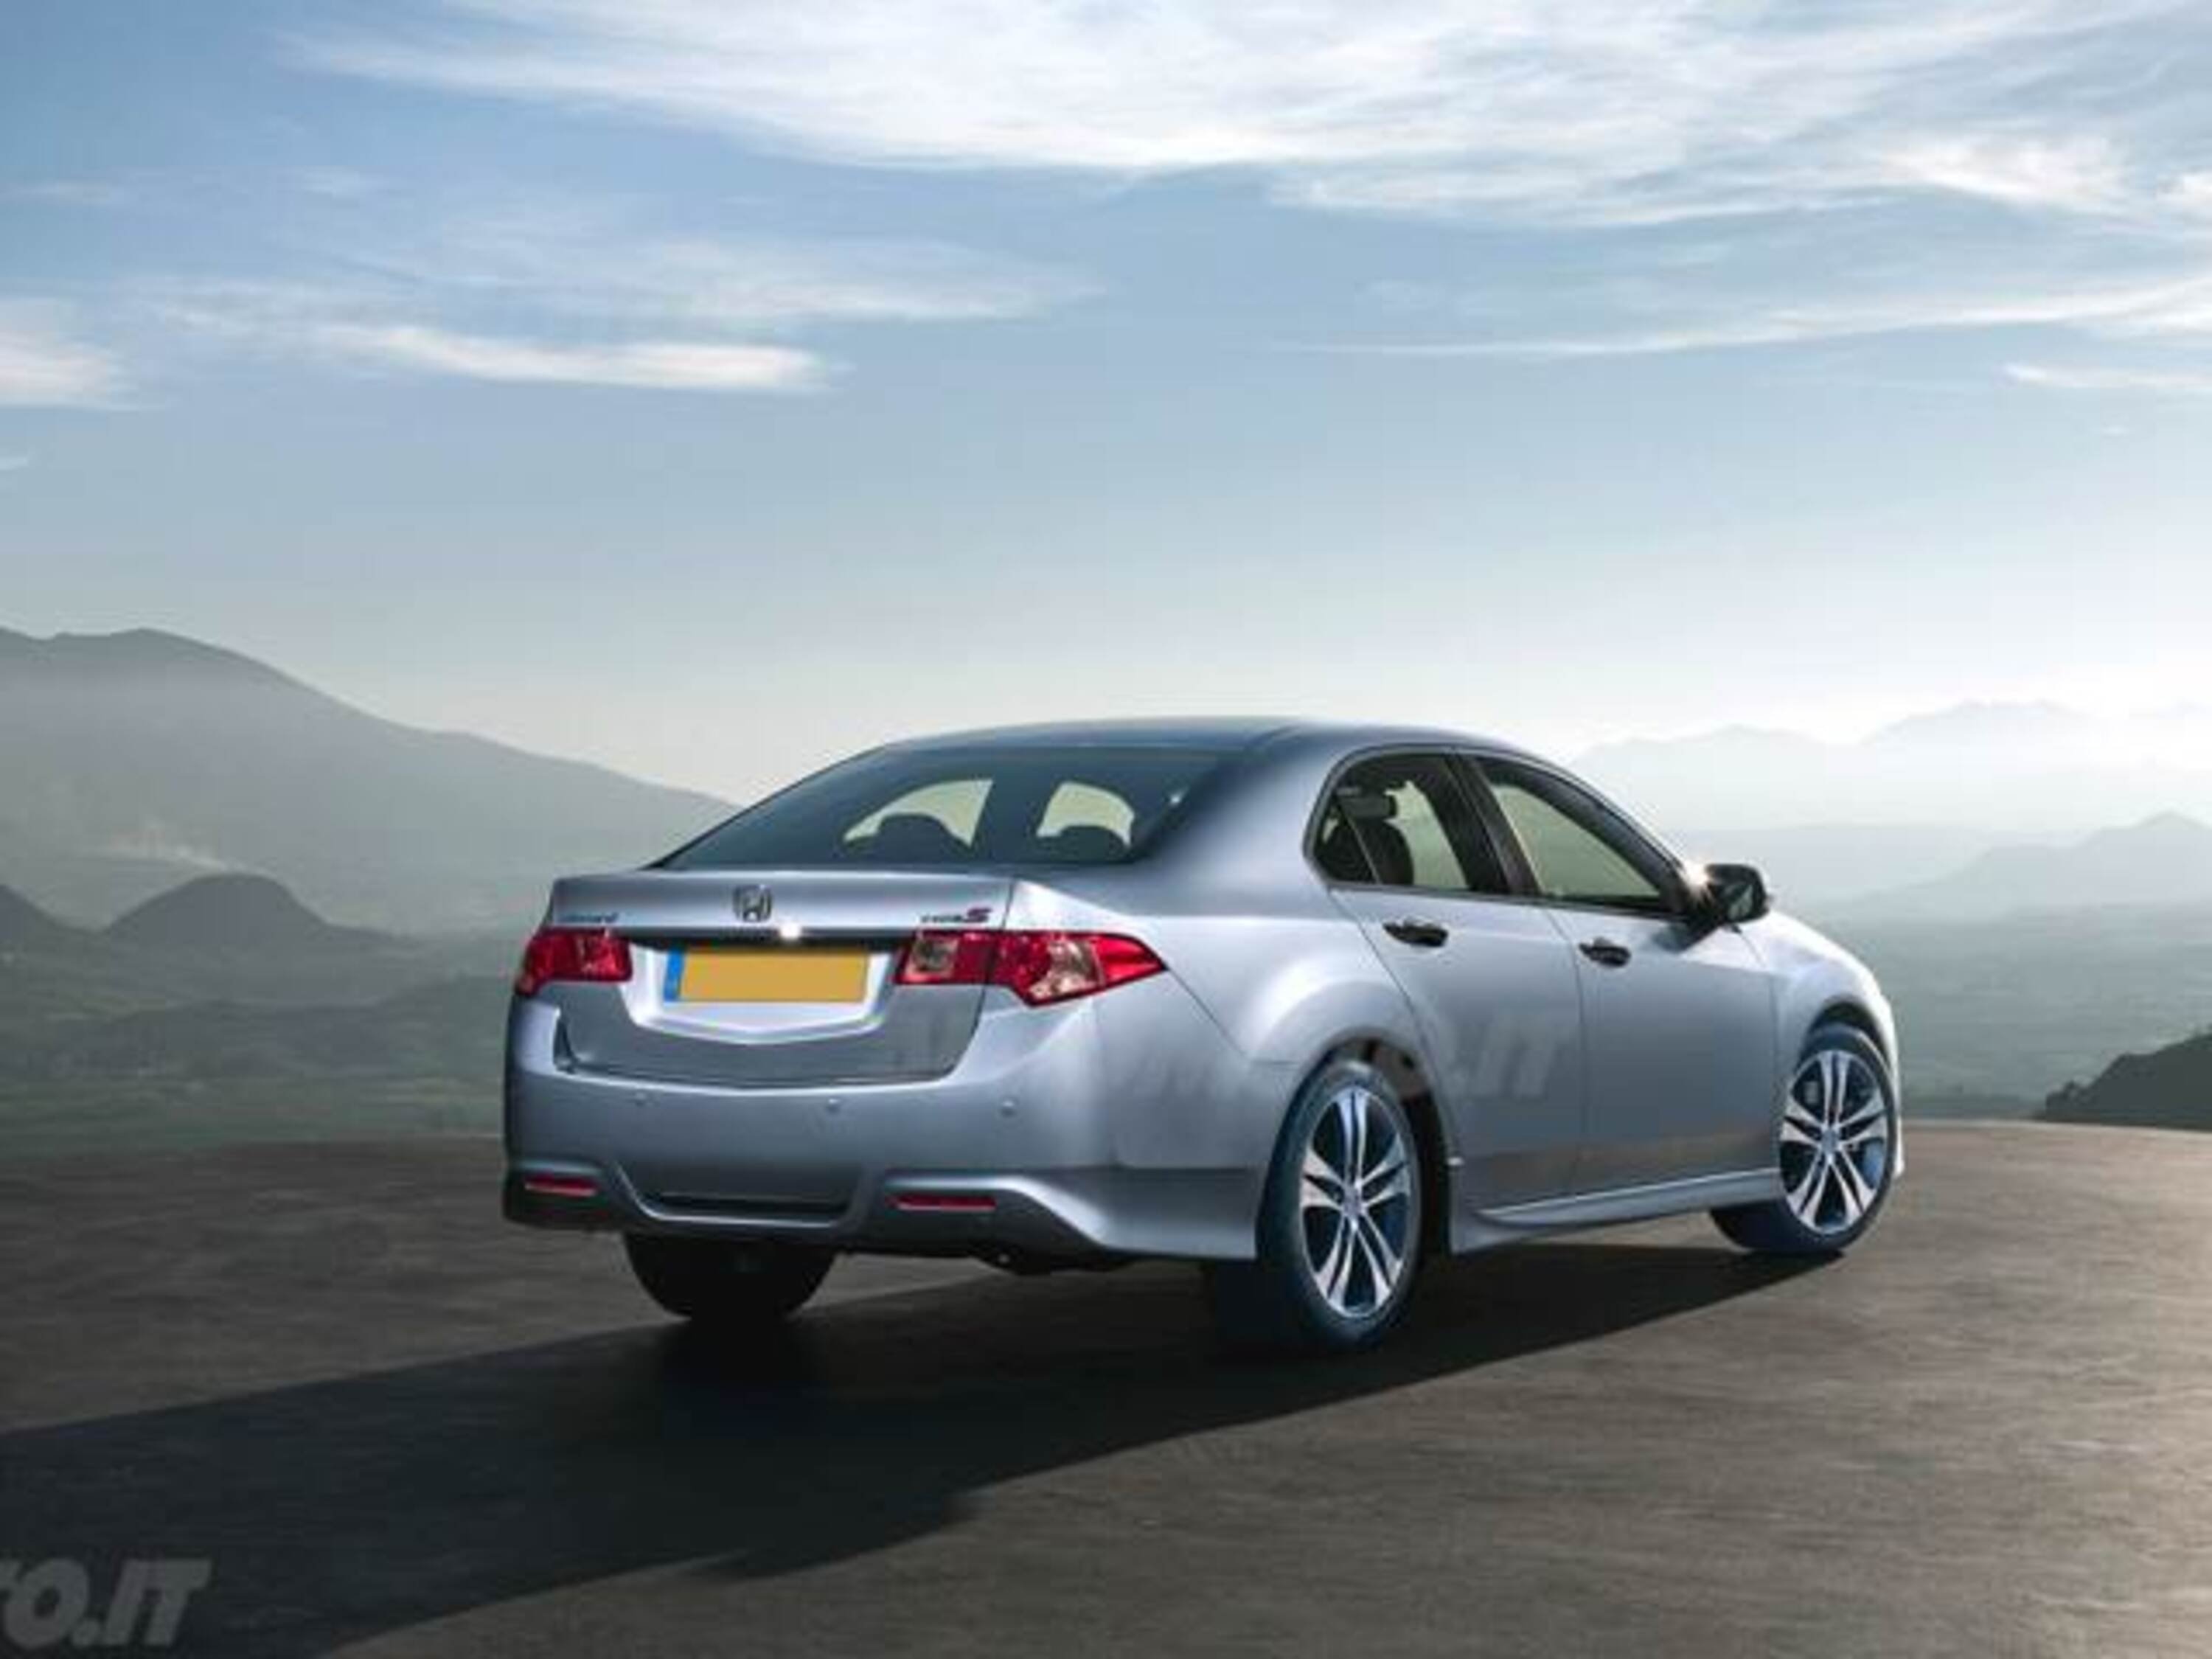 Honda Accord 2.2 i-DTEC Type S Advanced Safety Pack